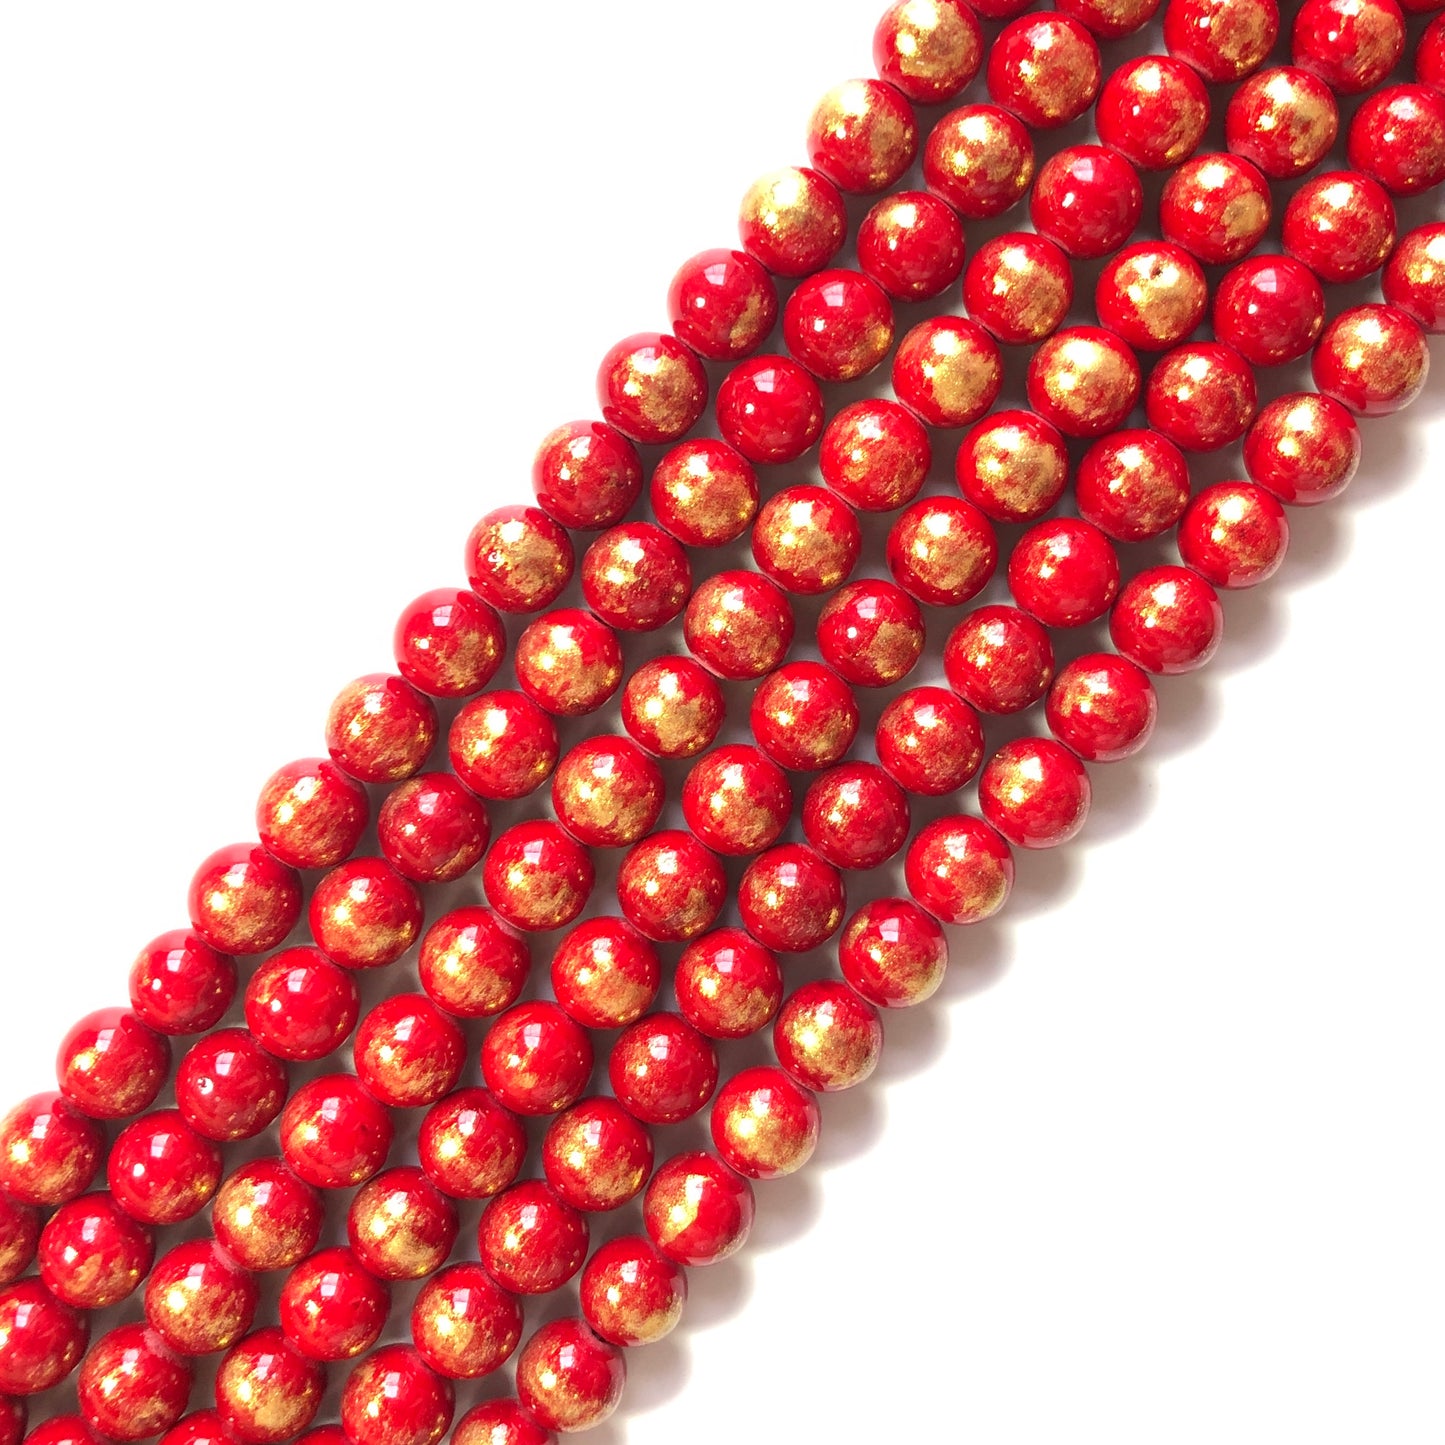 2 Strands/lot 8mm, 10mm Red Gold Plated Jade Round Stone Beads Stone Beads 8mm Stone Beads Gold Plated Jade Beads Round Jade Beads Charms Beads Beyond